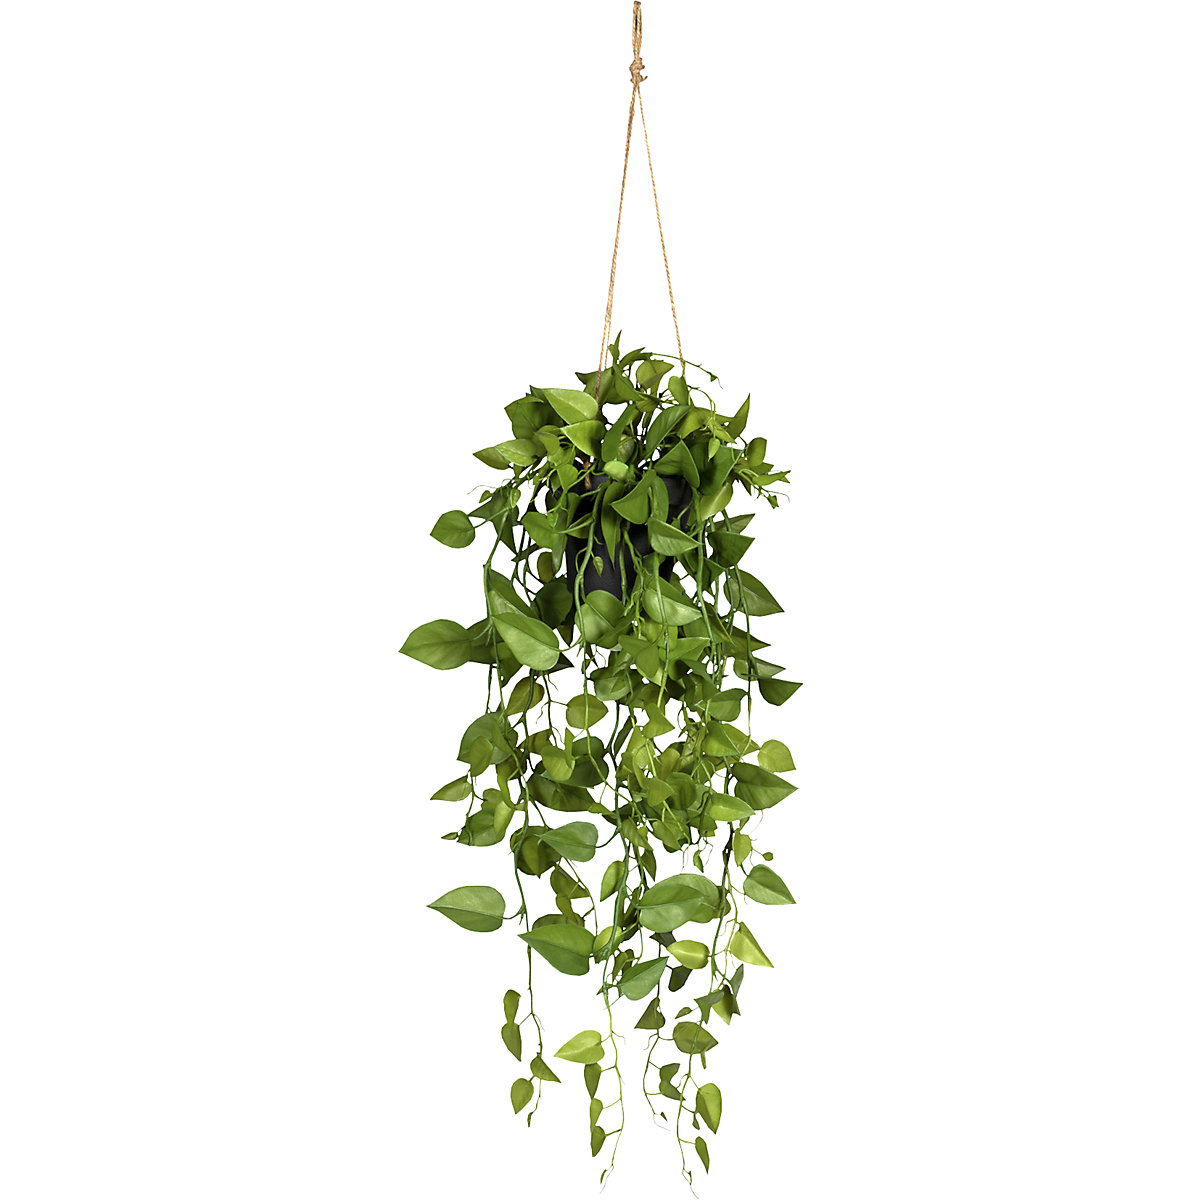 Philodendron hangplant